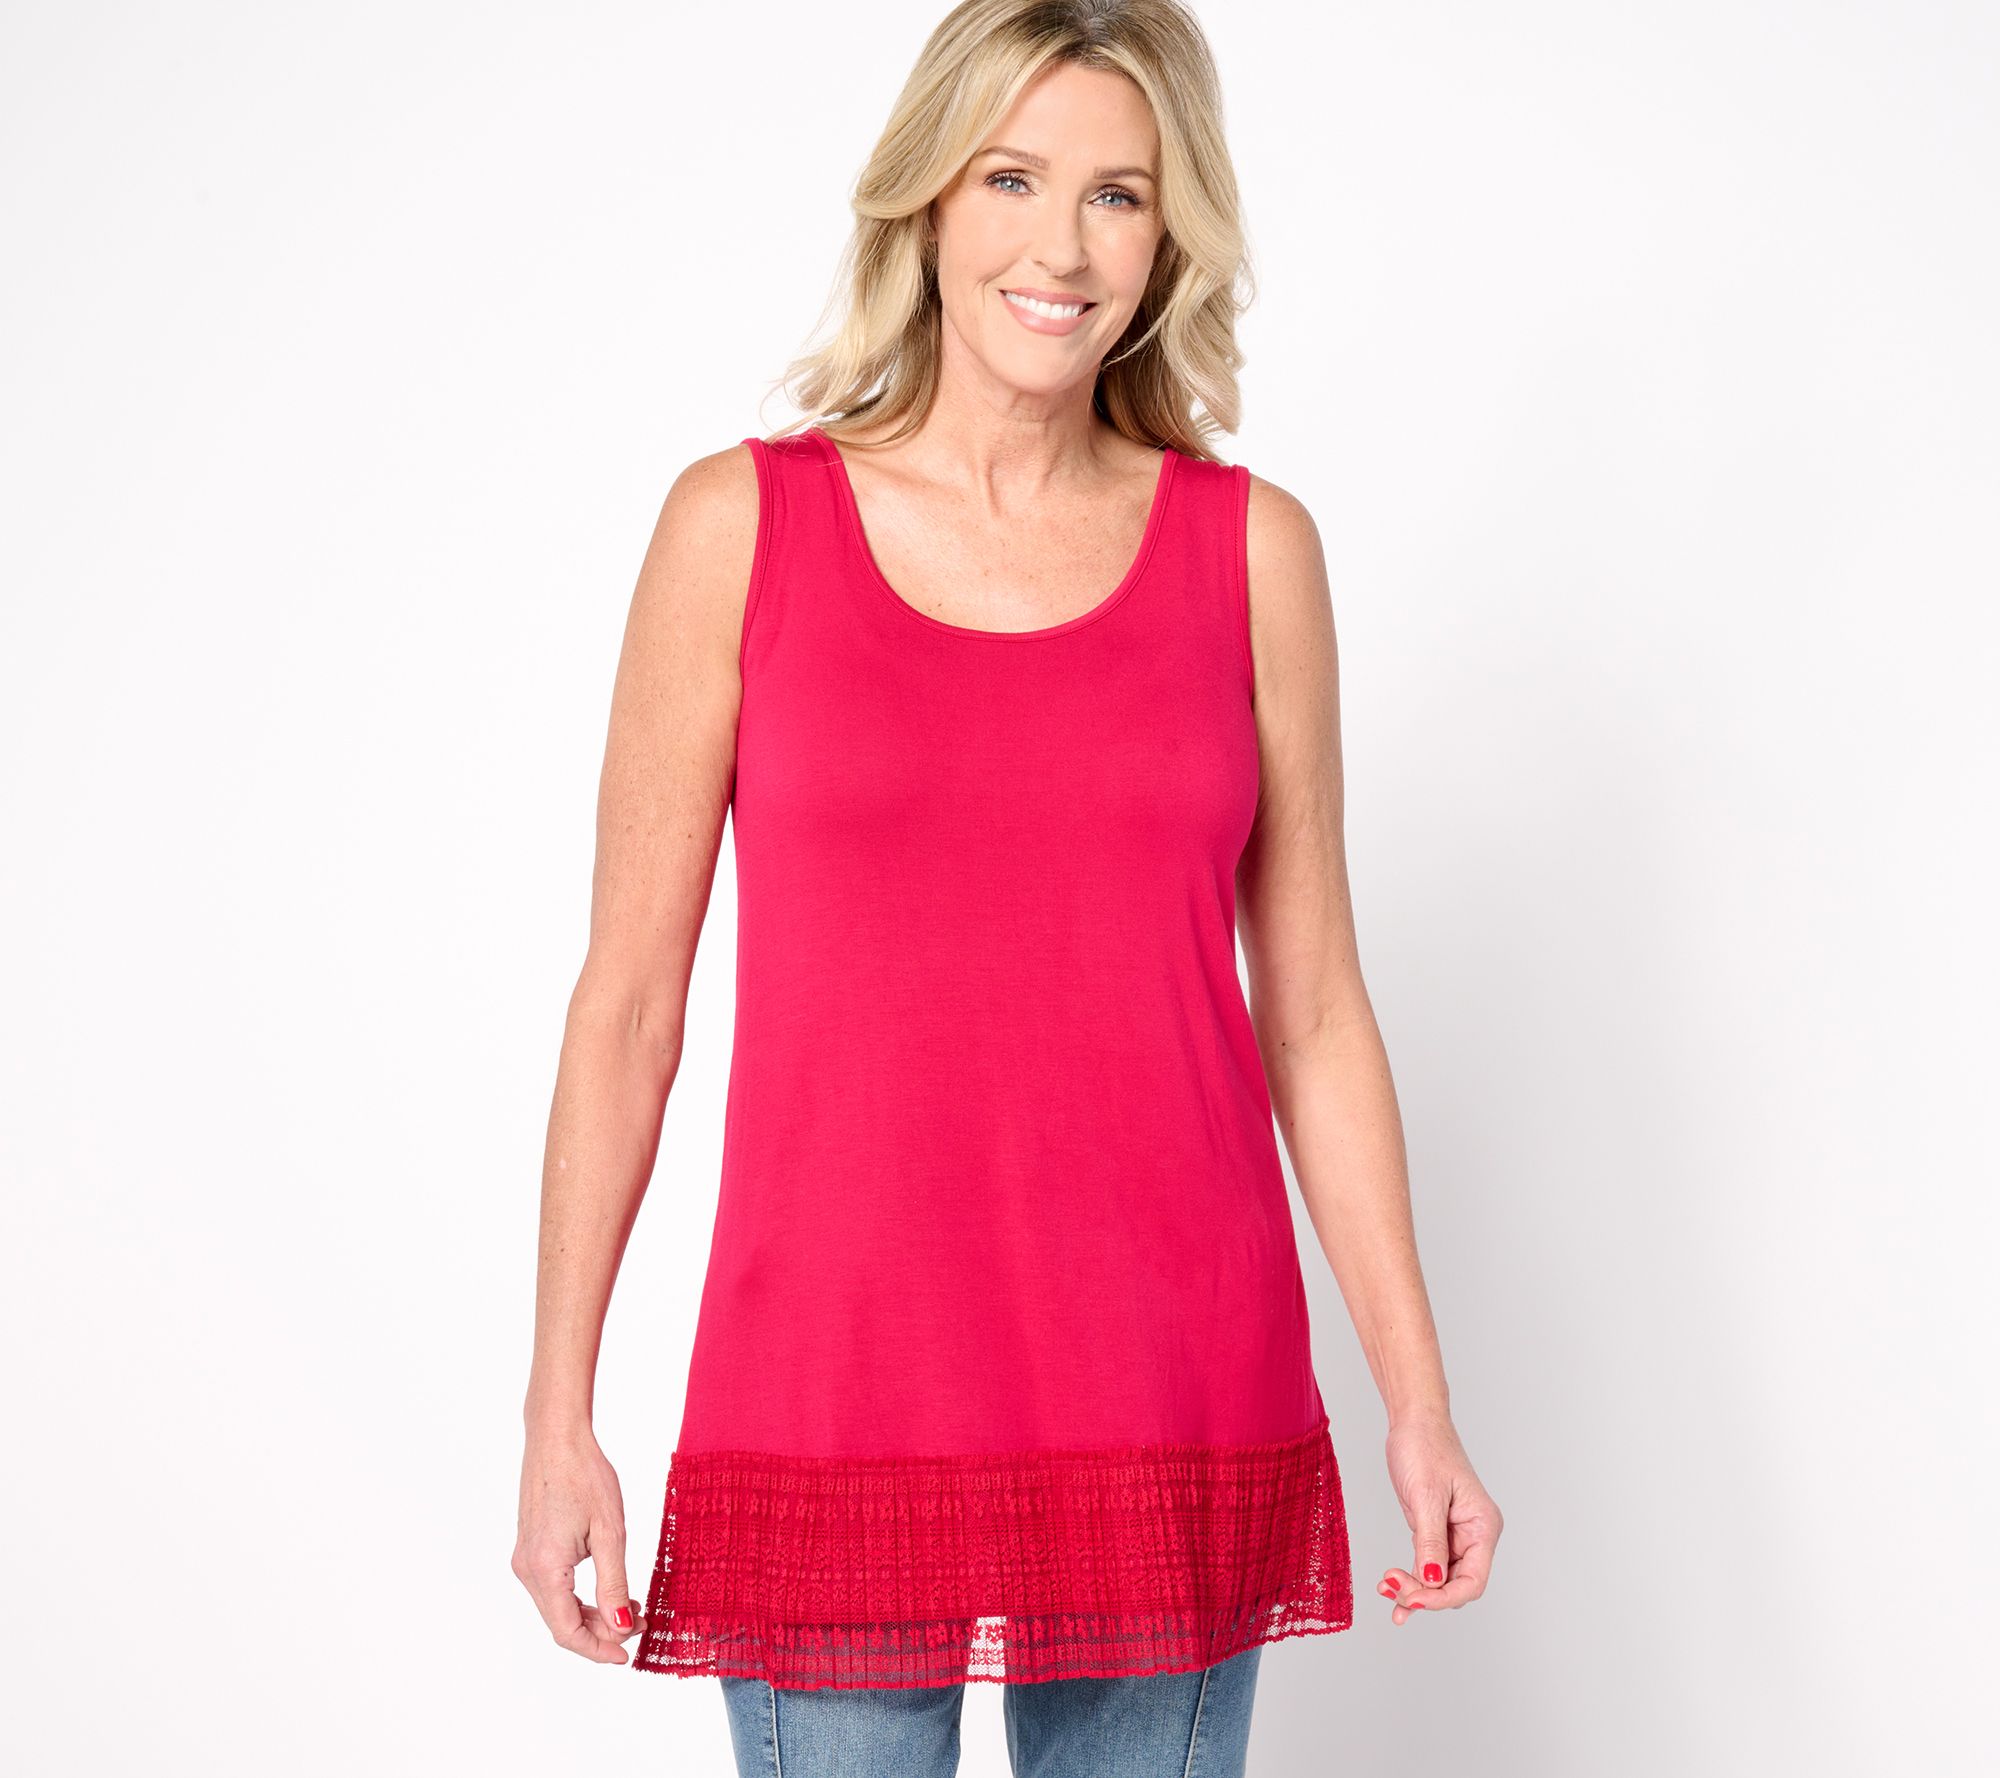 Top Hem Broomstick Goldstein Tank Layers LOGO Lori with by